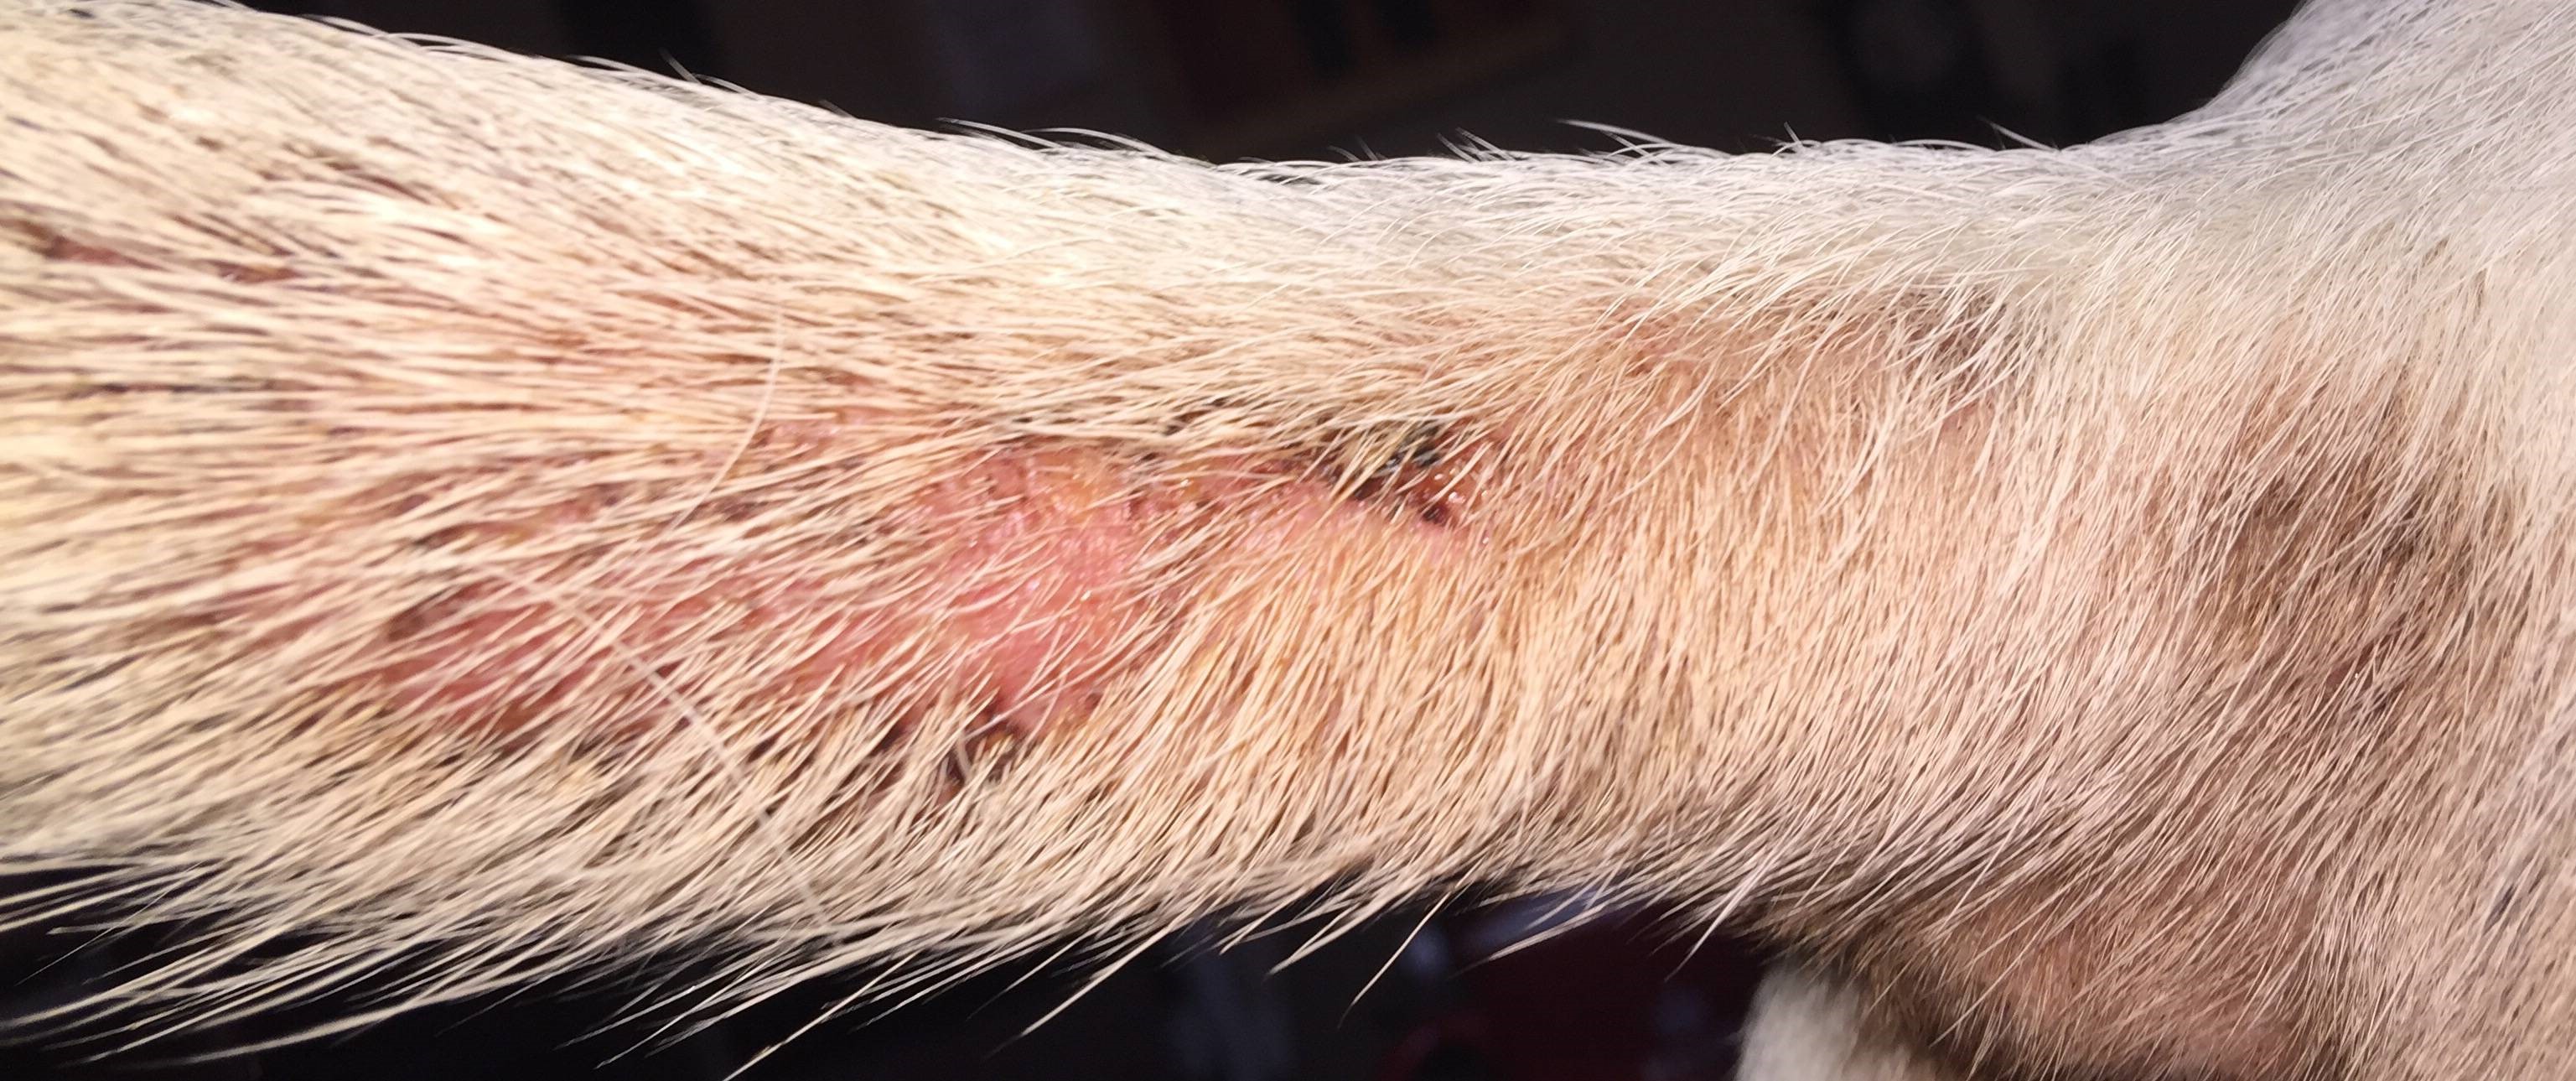 Canine Fleas: Everything You Need to Know - Riva's Remedies